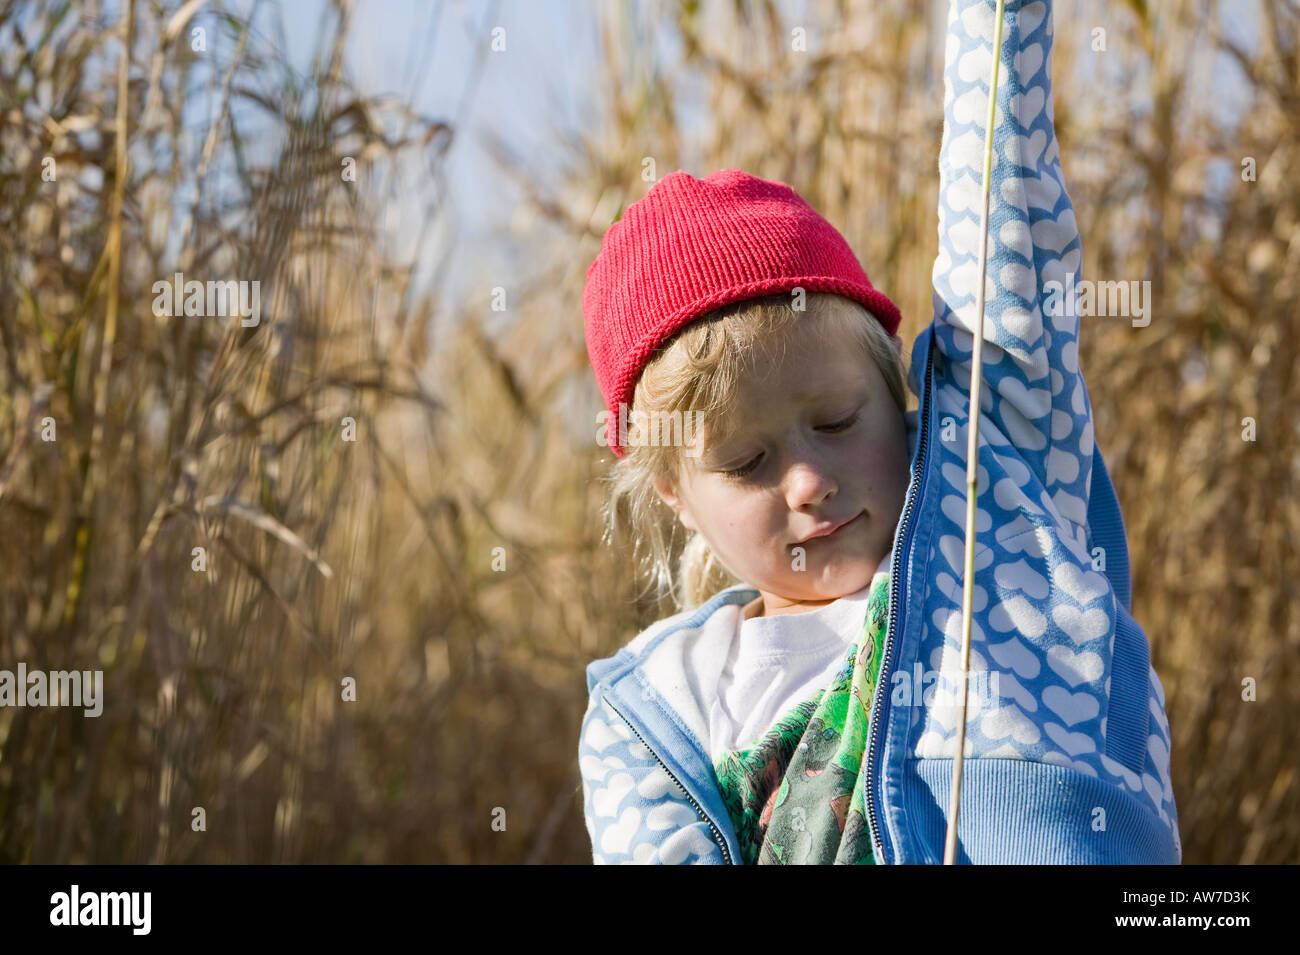 Girl with red hat in tall grass field Stock Photo